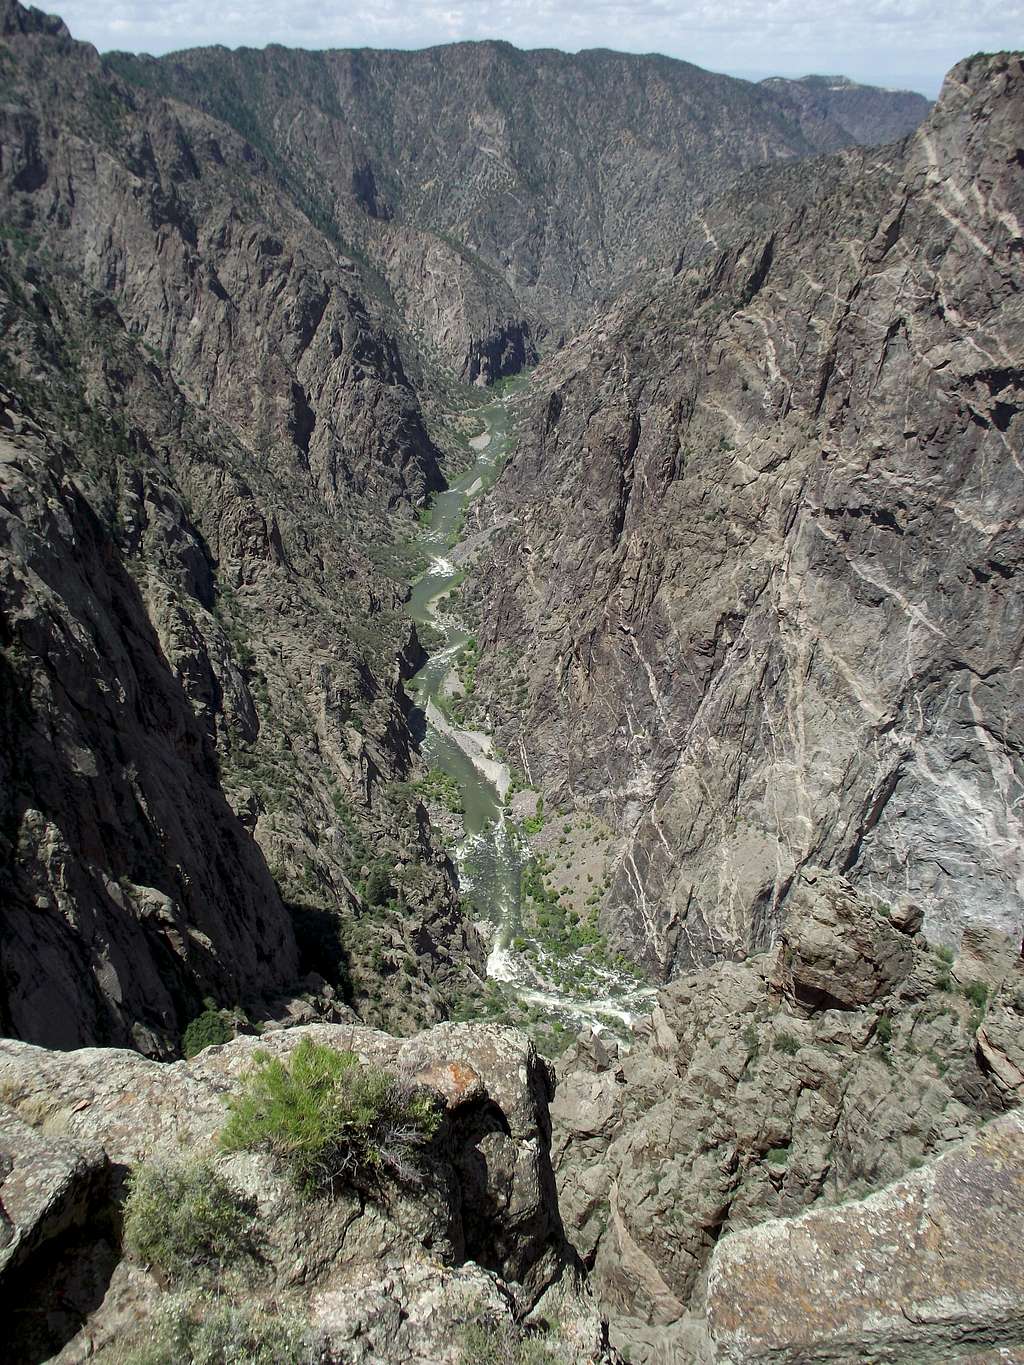 Gunnison at the Bottom of the Canyon